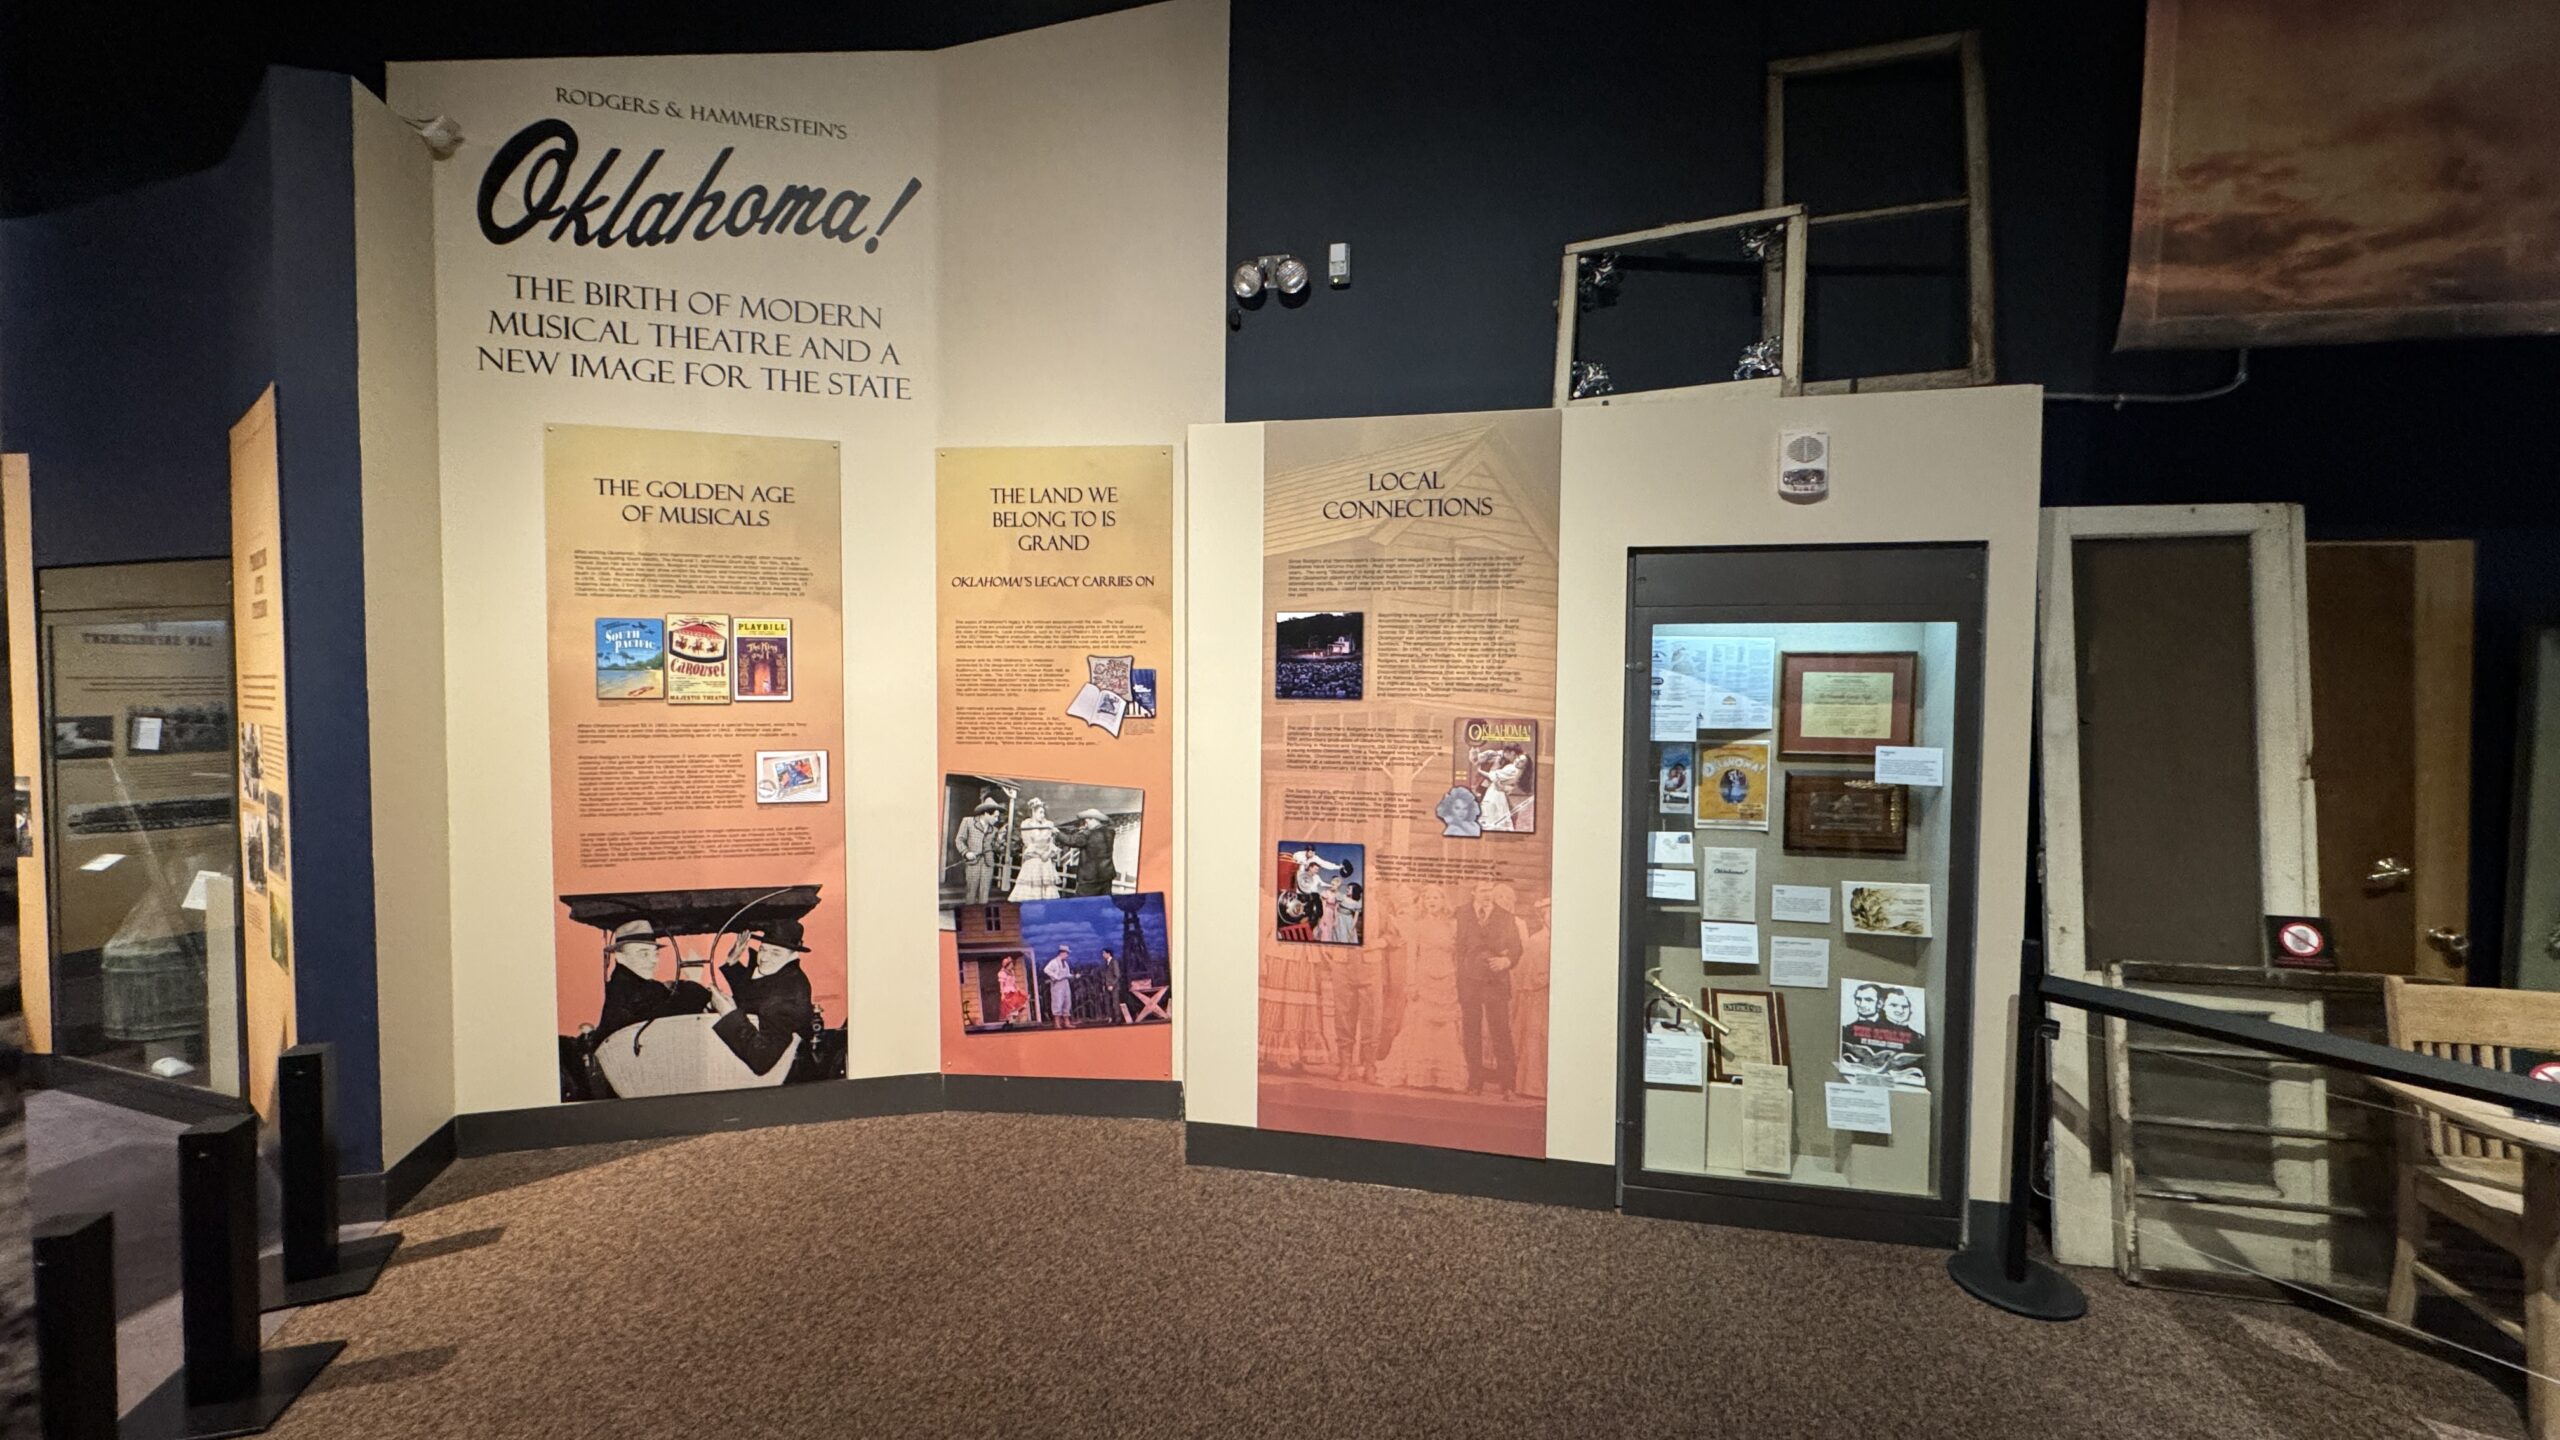 Conference attendees visited the Oklahoma History Museum, including an exhibit on Oklahoma! the musical